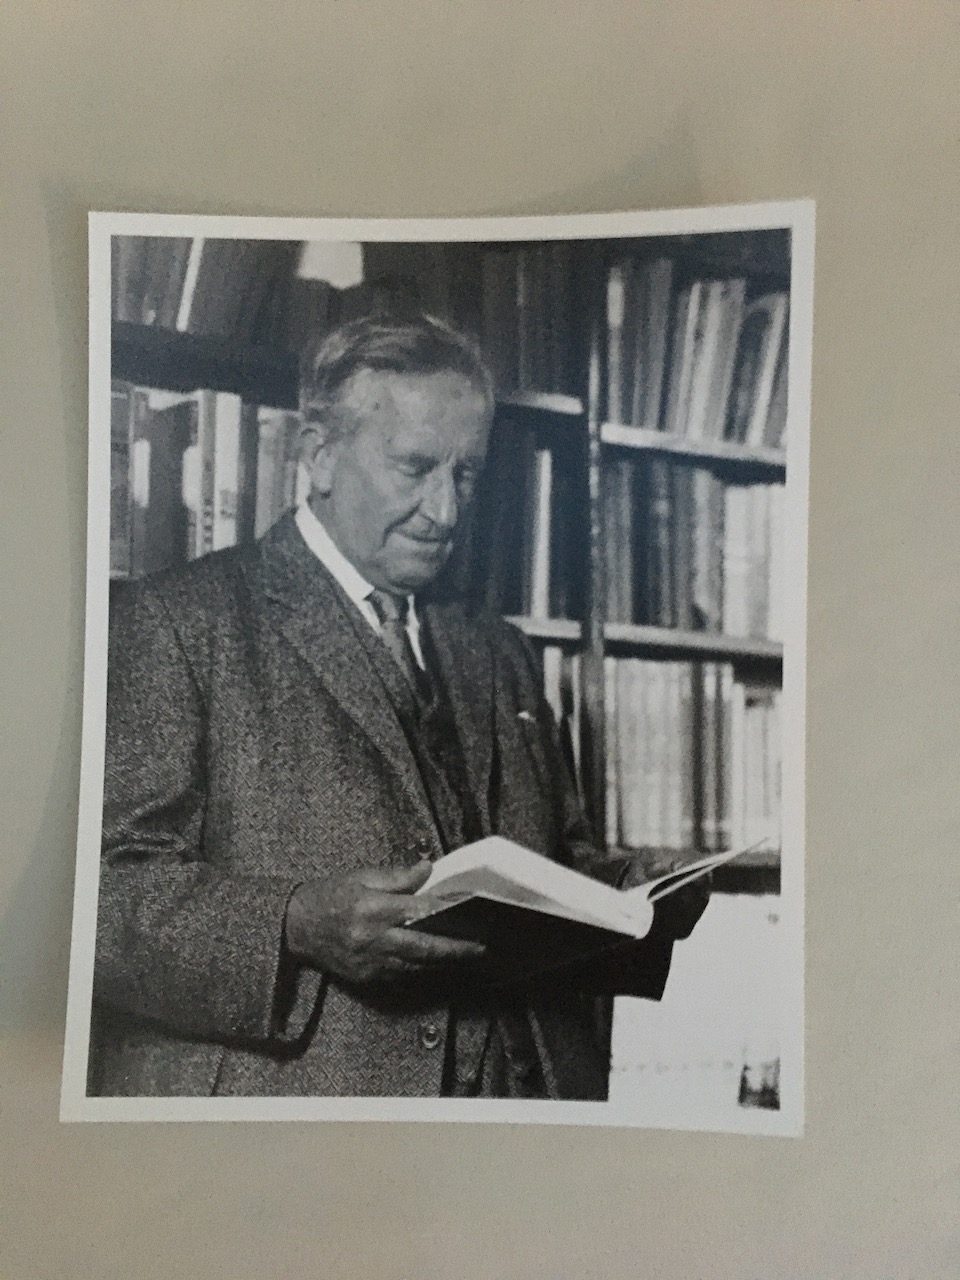 Exclusive Photographic Print: J.R.R. Tolkien immersed in a book in his library